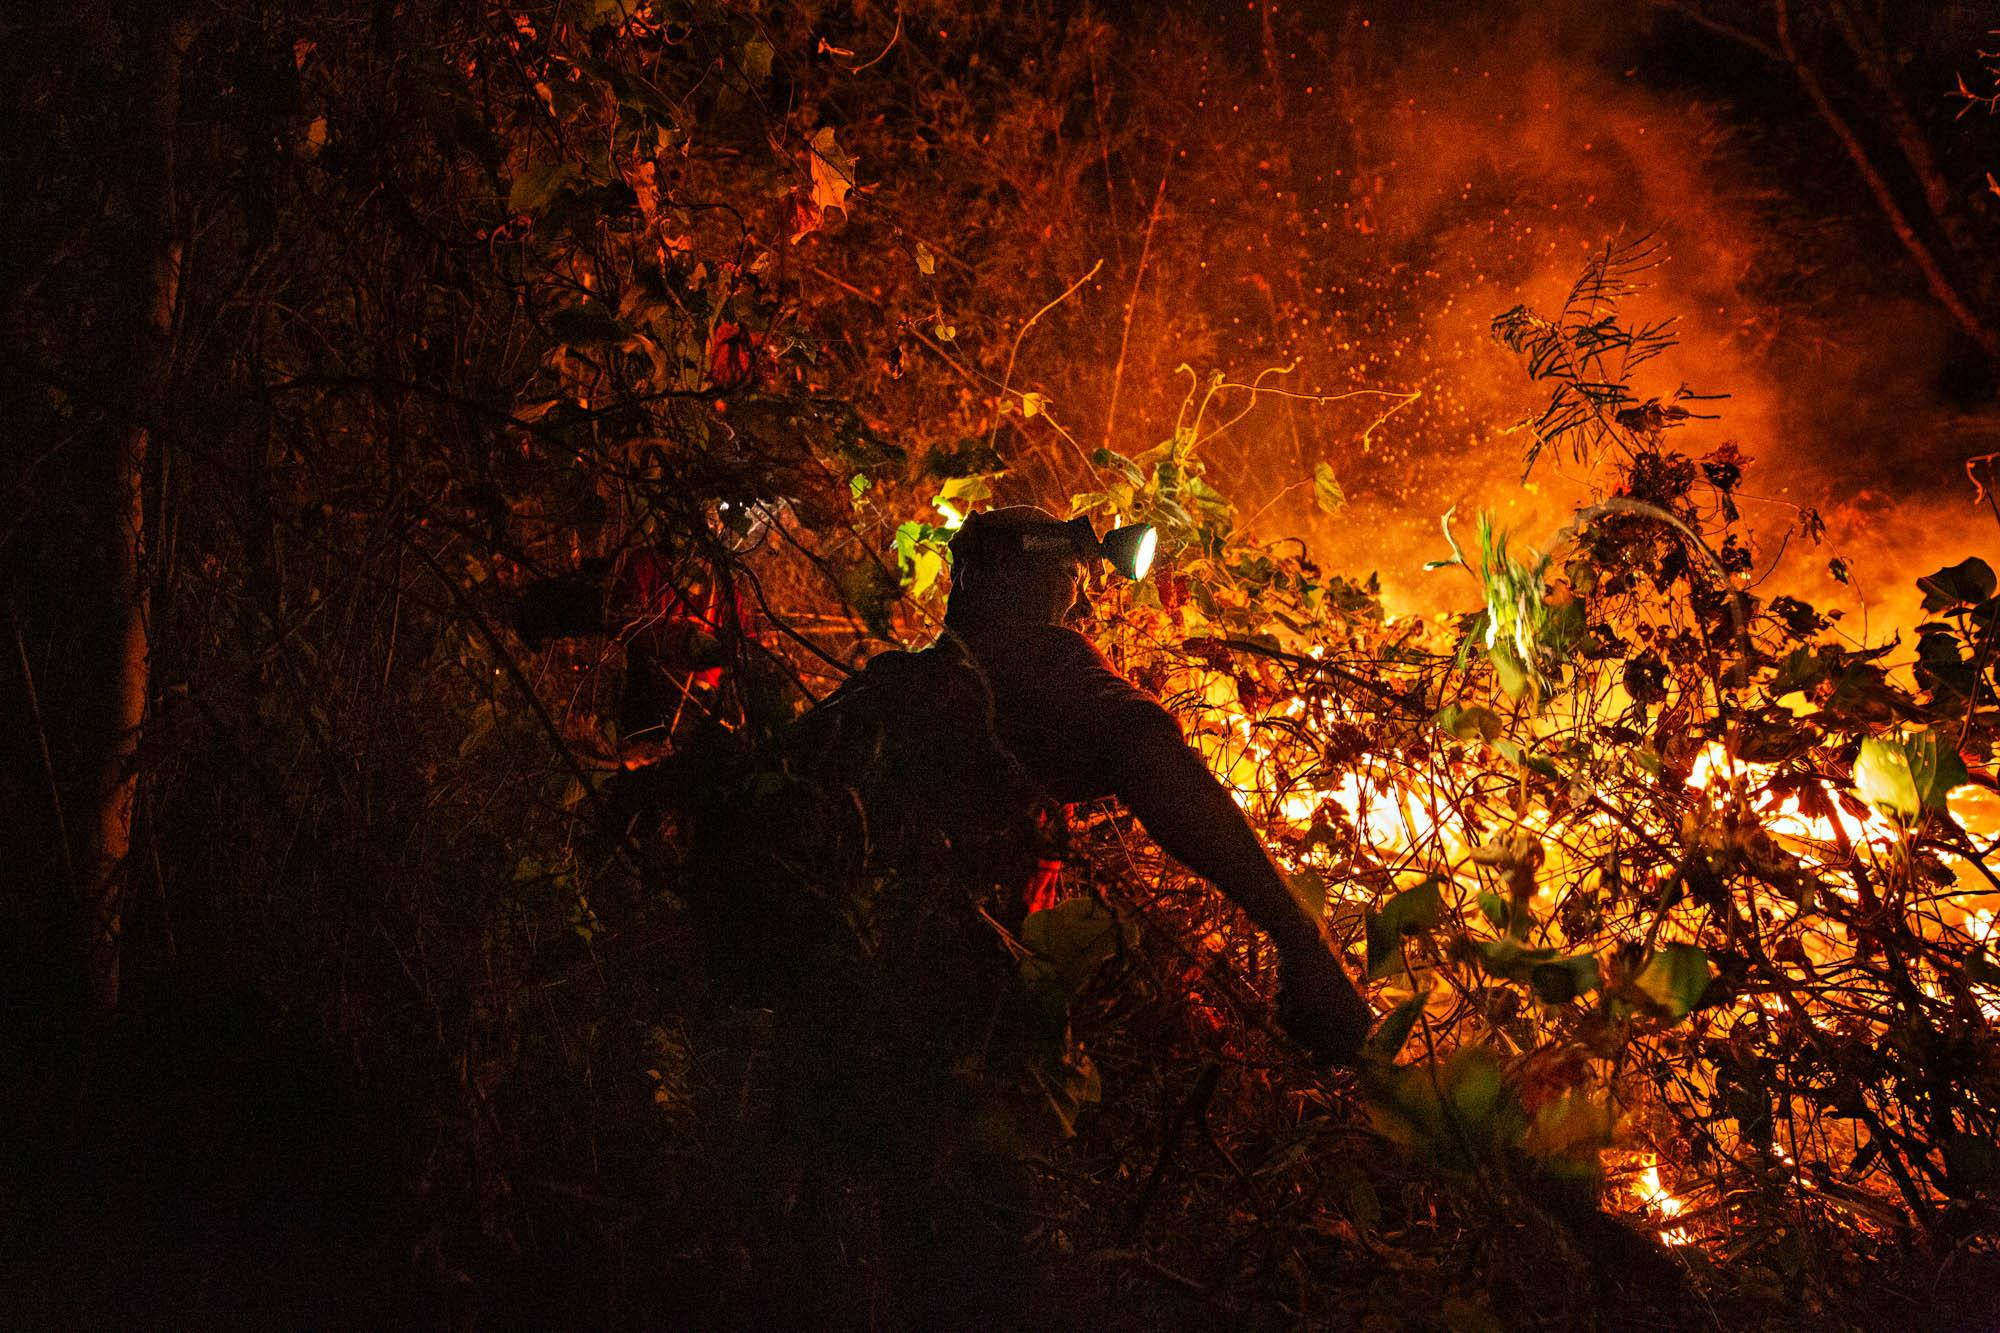 A fire fighter from Doi Mae Salong fire station works to put out a forest fire near Thai-Myanmar border, April 2019. The part-time hires worked day...